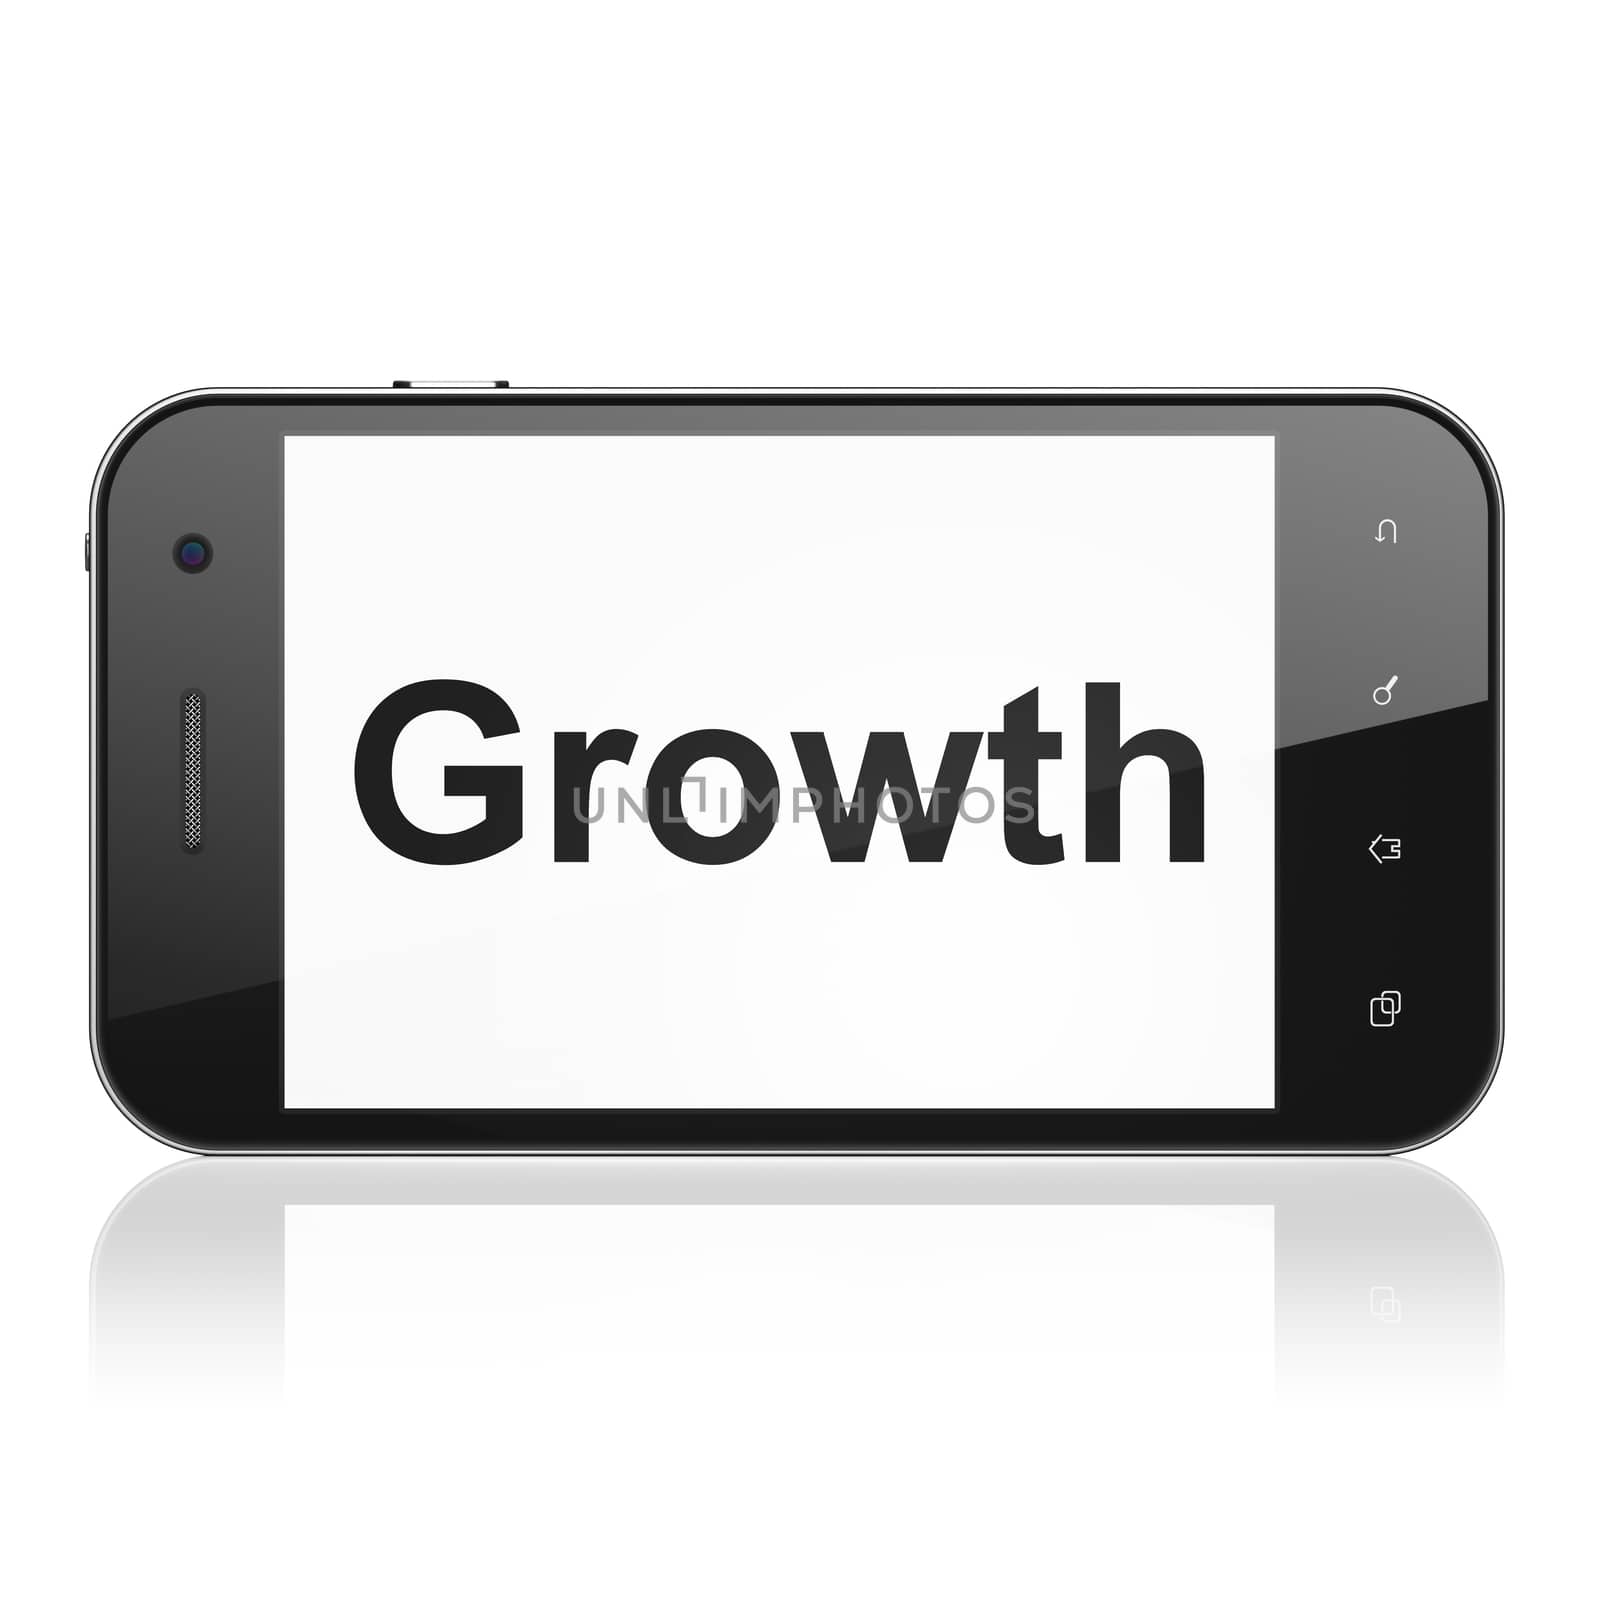 Business concept: smartphone with text Growth on display. Mobile smart phone on White background, cell phone 3d render